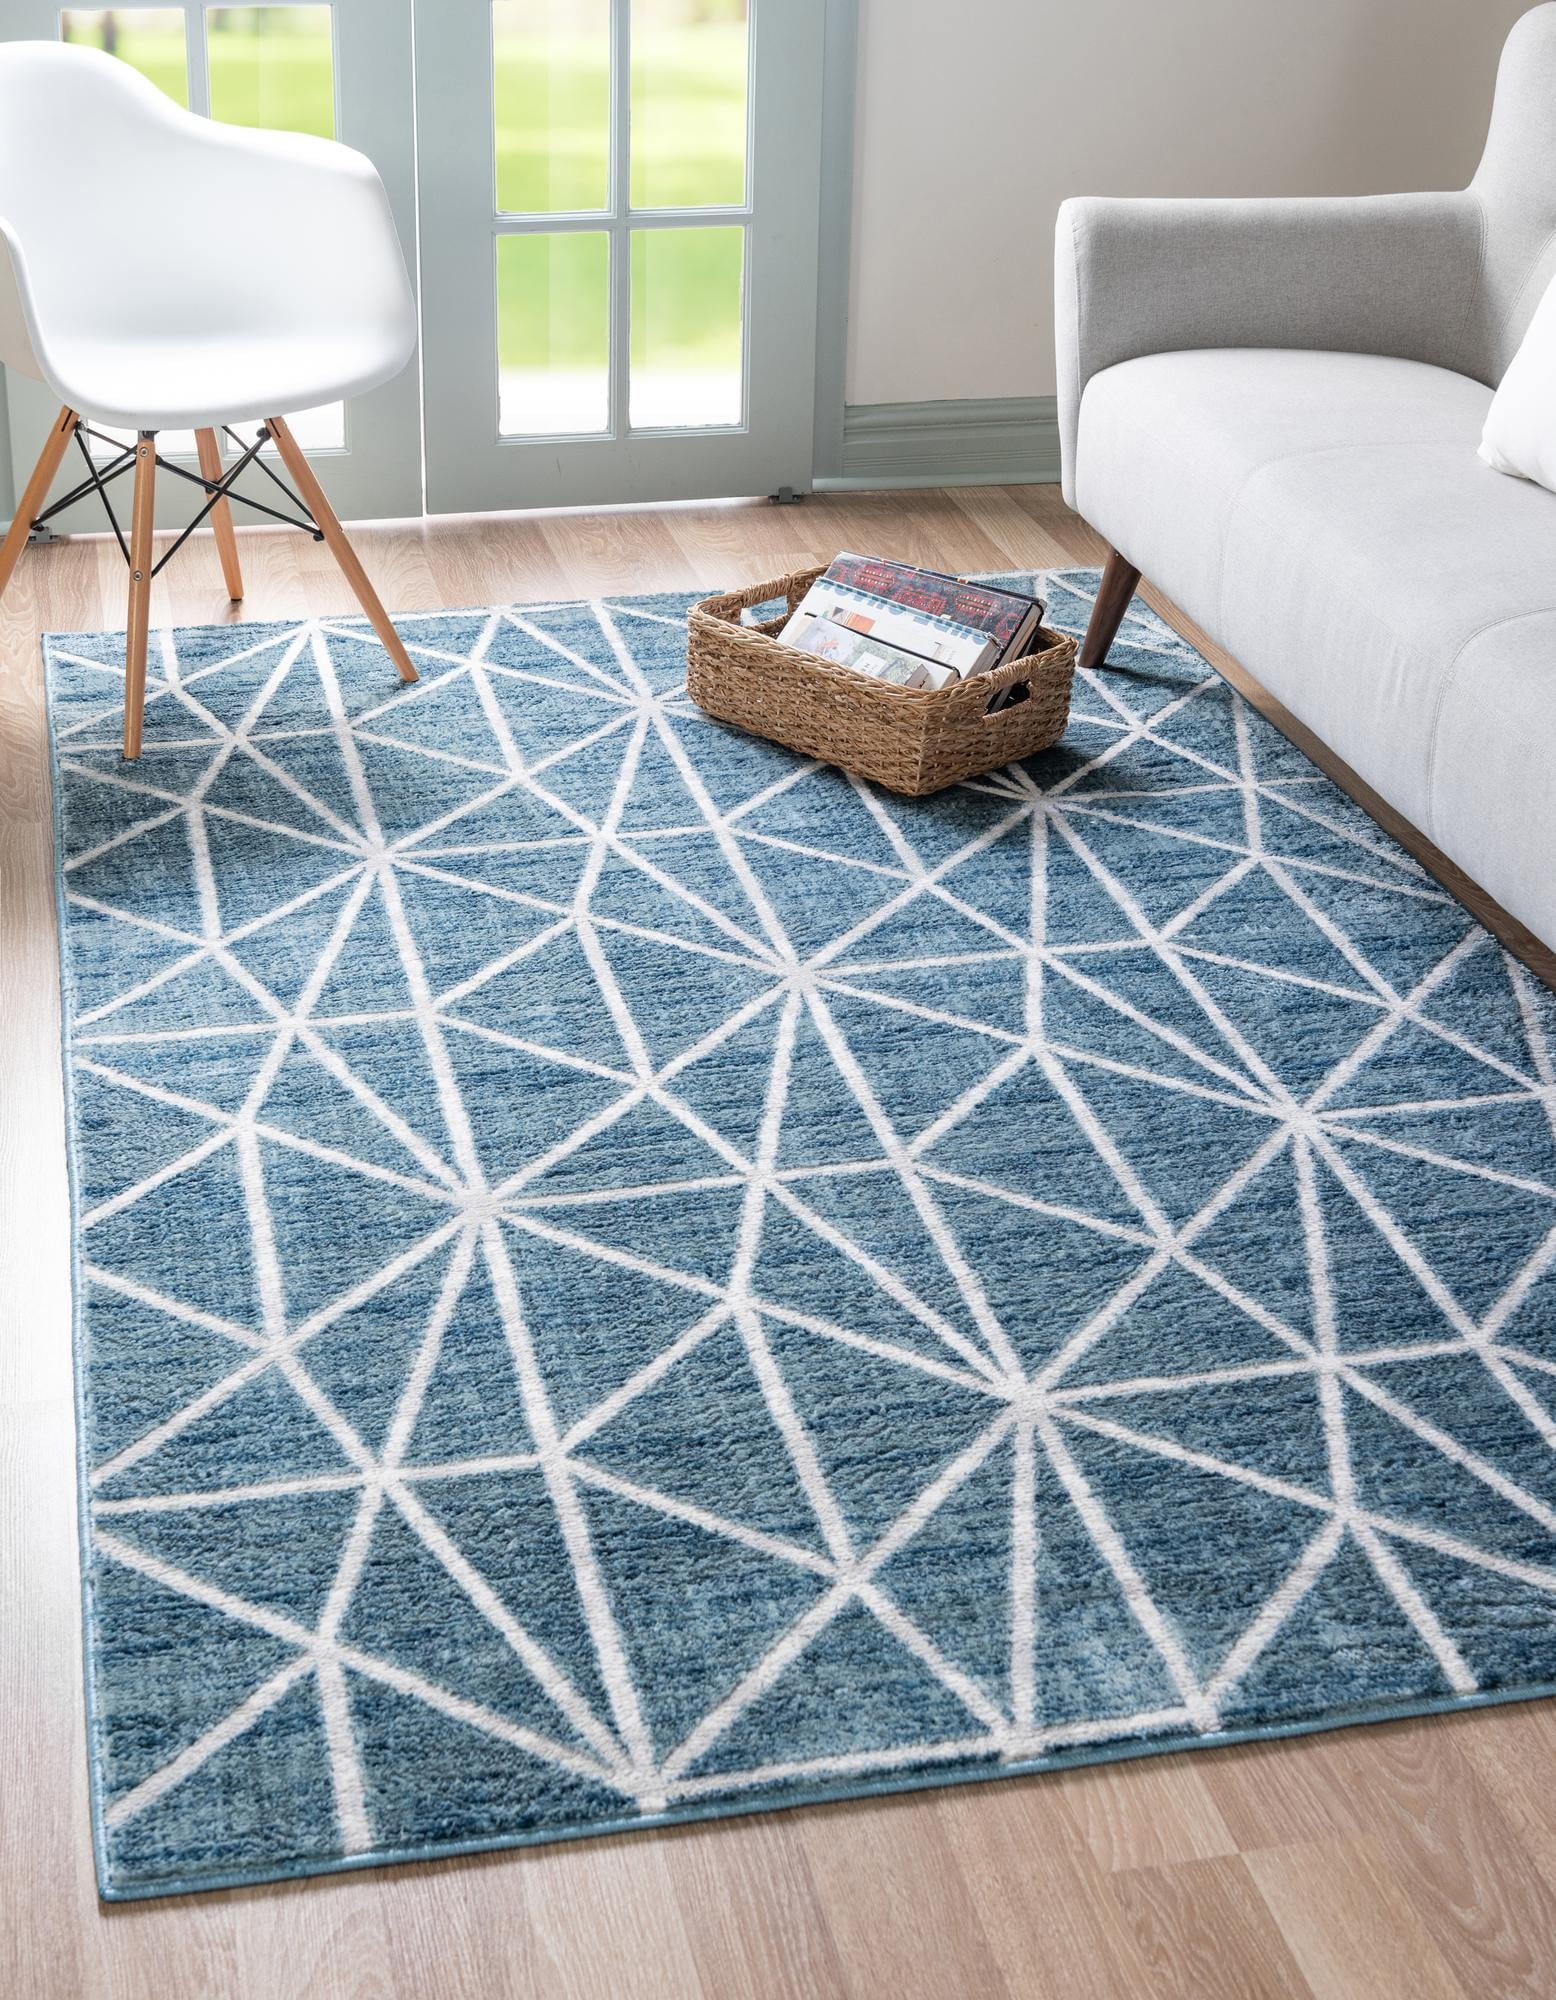 Teal Moroccan Trellis Rug Small Large Navy Blue Mats Geometric Living Room Rugs 